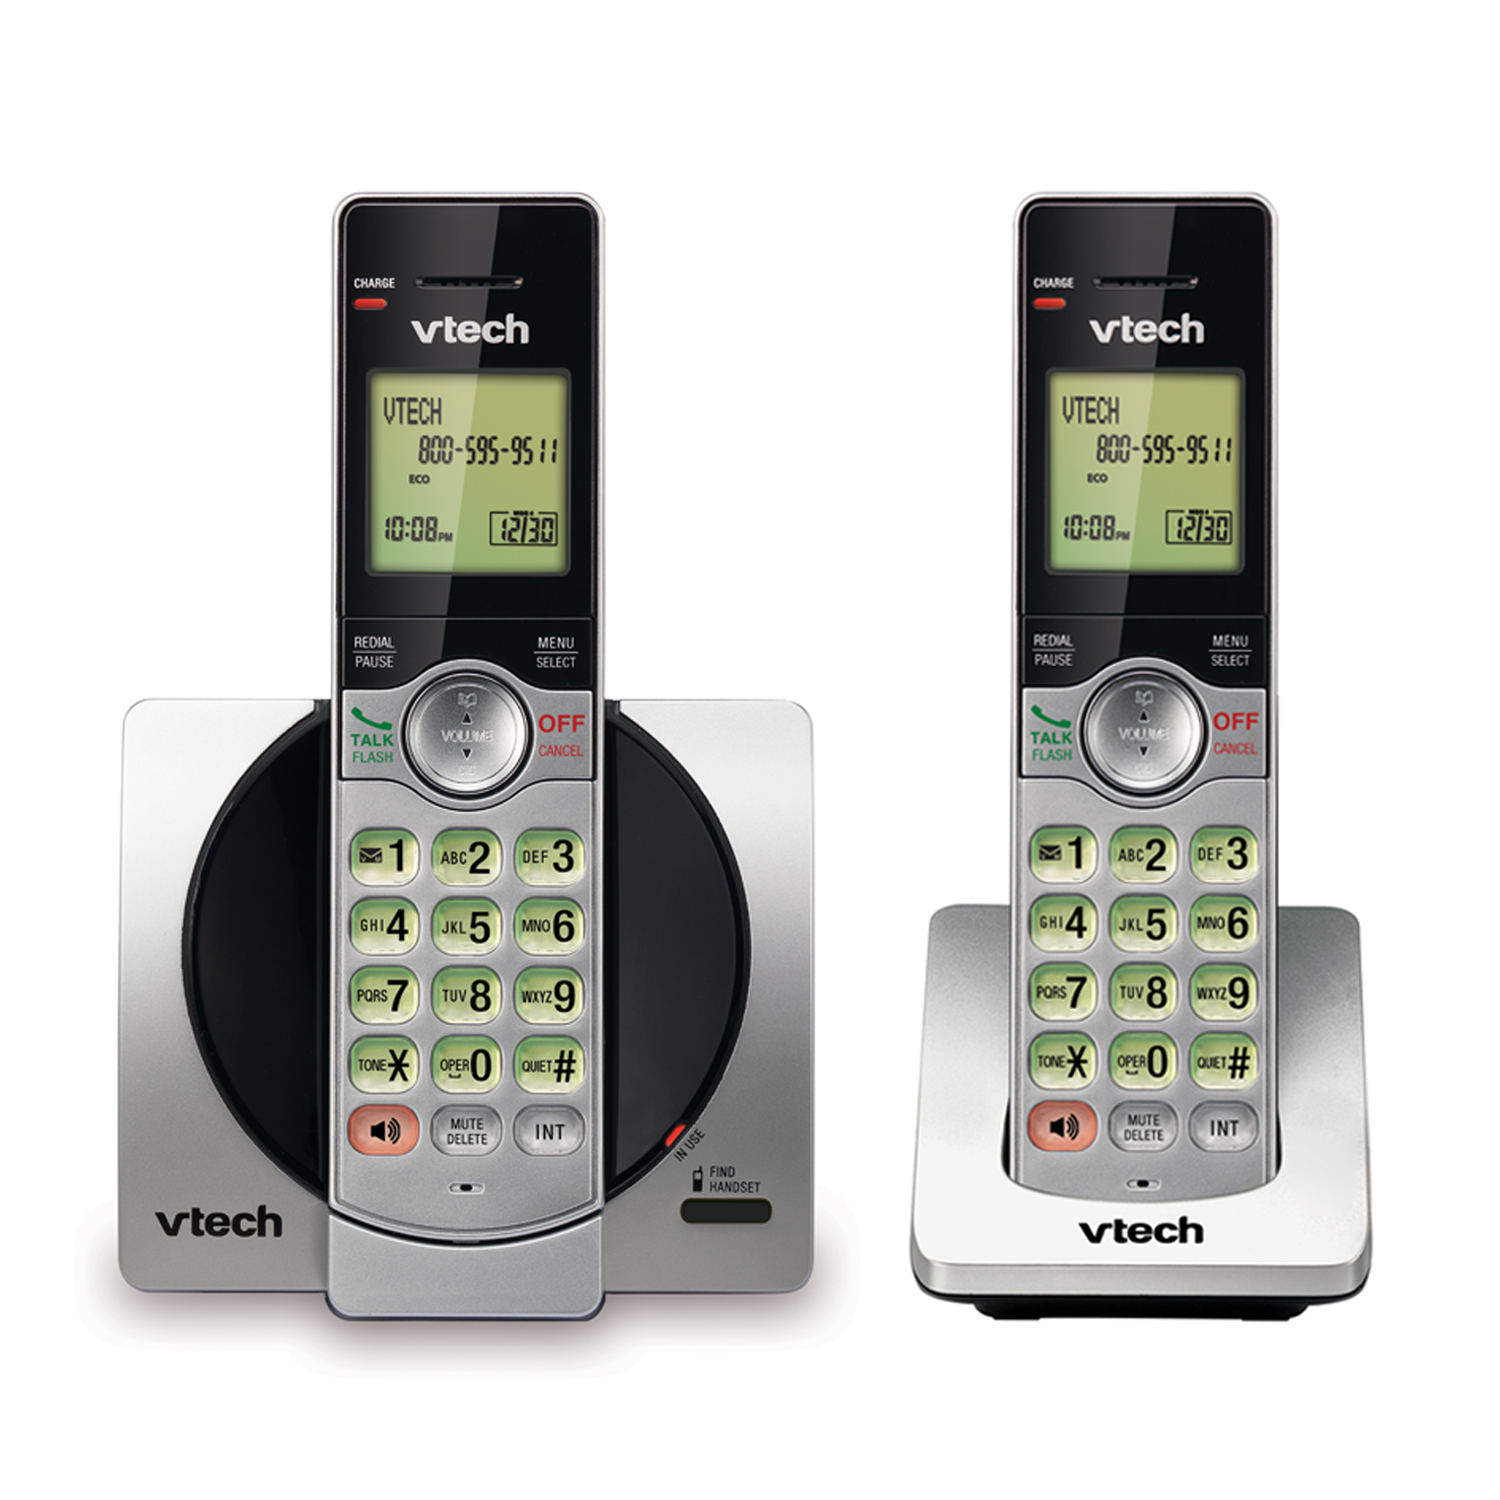 VTech CS6919-2 DECT 6.0 Cordless Phone with Caller ID and Handset Speakerphone, 2 Handsets, Silver/Black - image 1 of 4